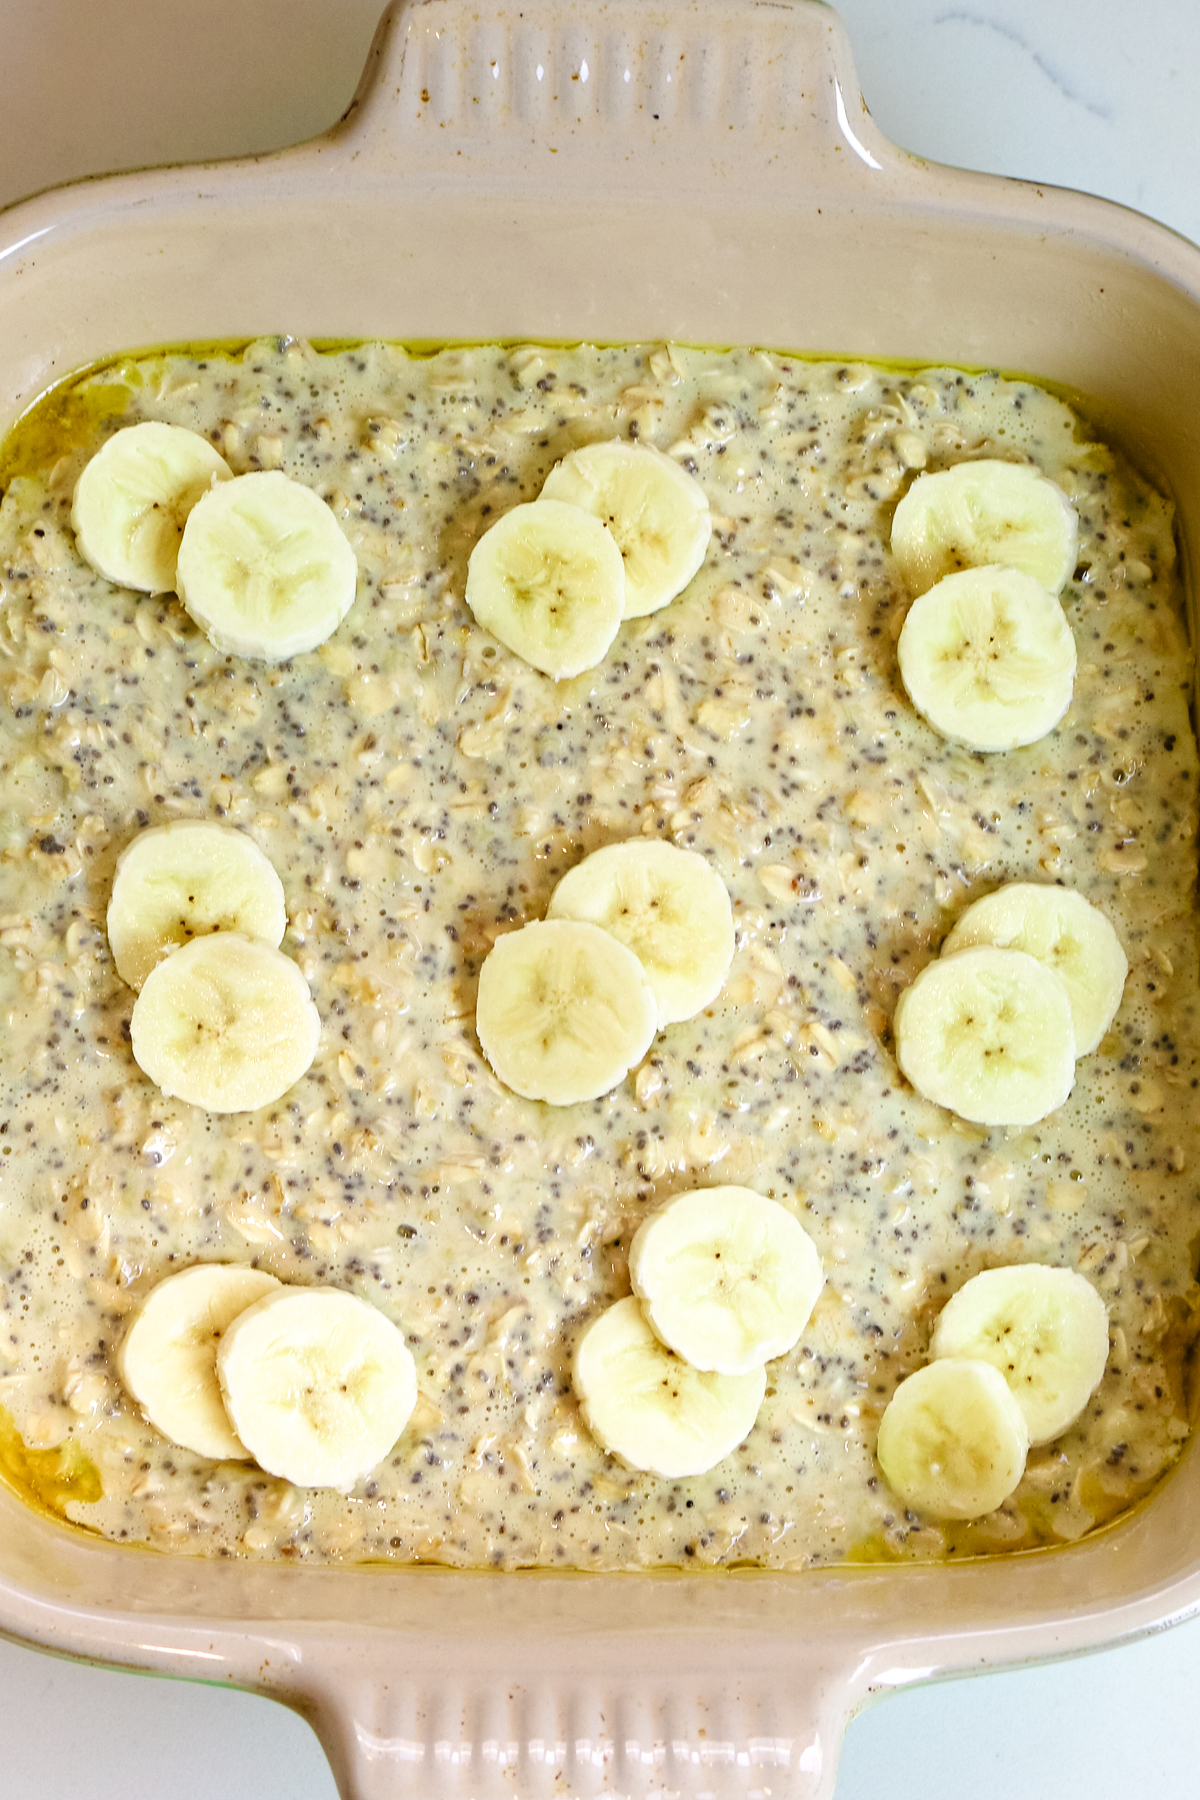 protein oats with chia seeds and sliced bananas on top in a baking dish.